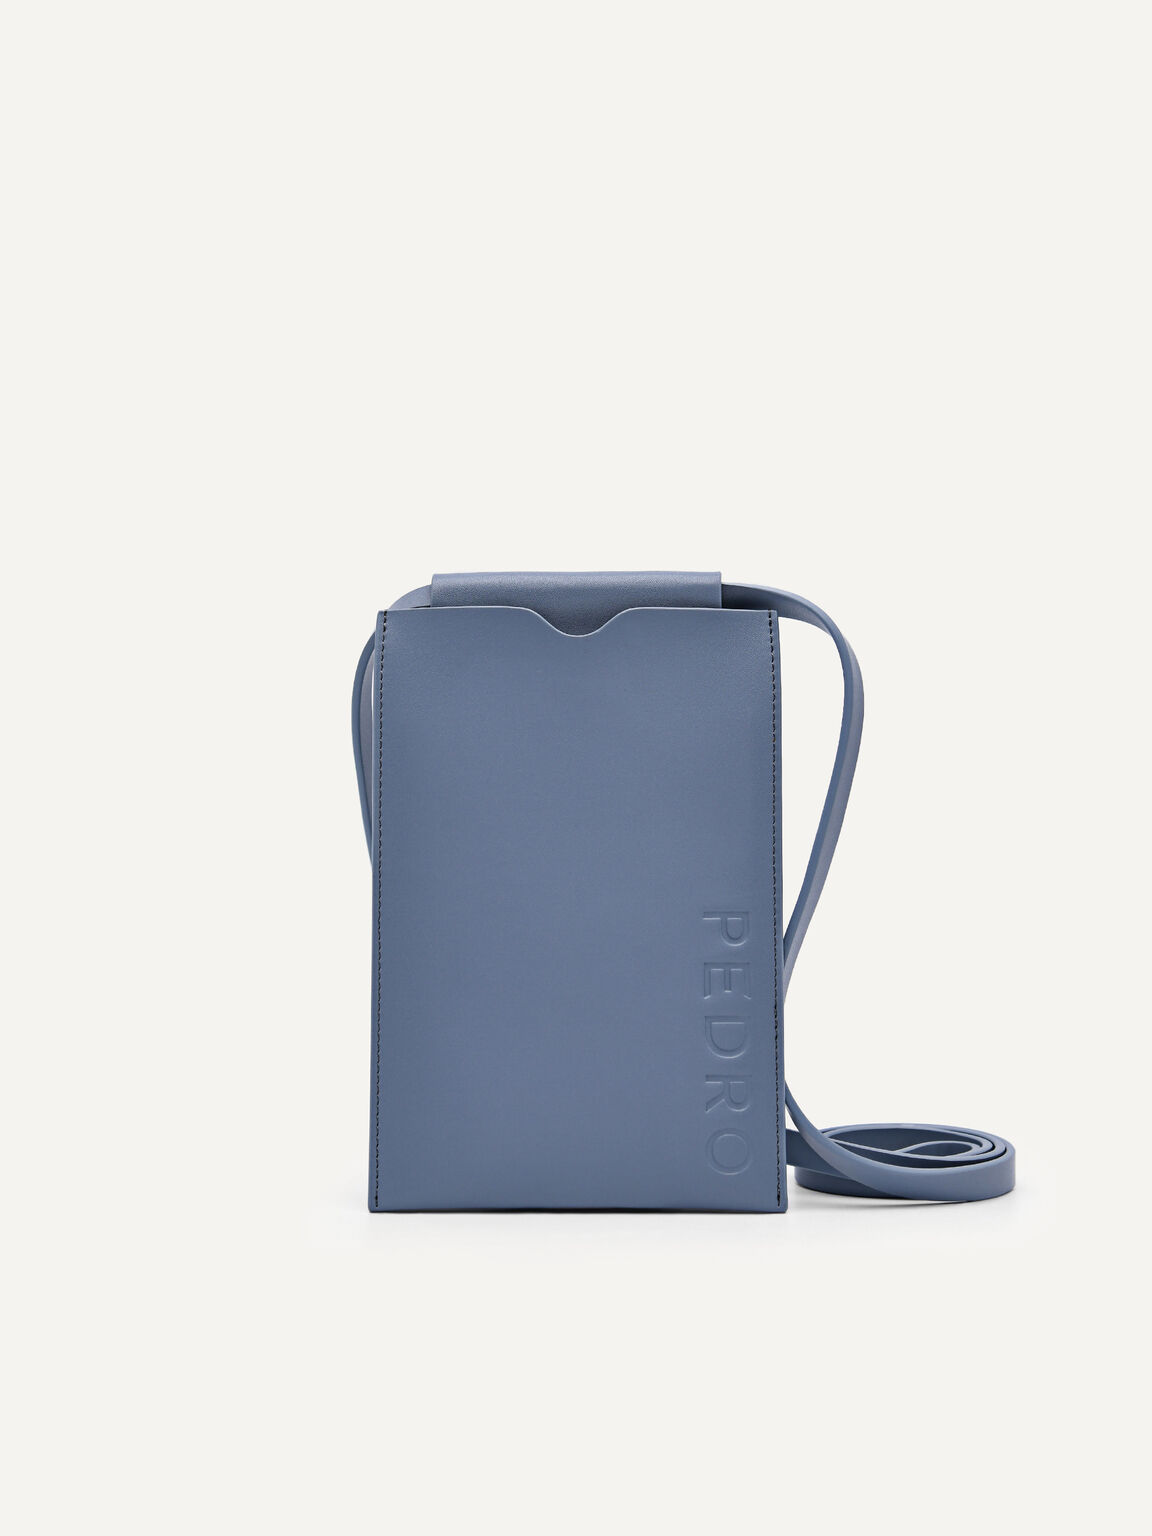 rip Phone Pouch with Lanyard, Slate Blue